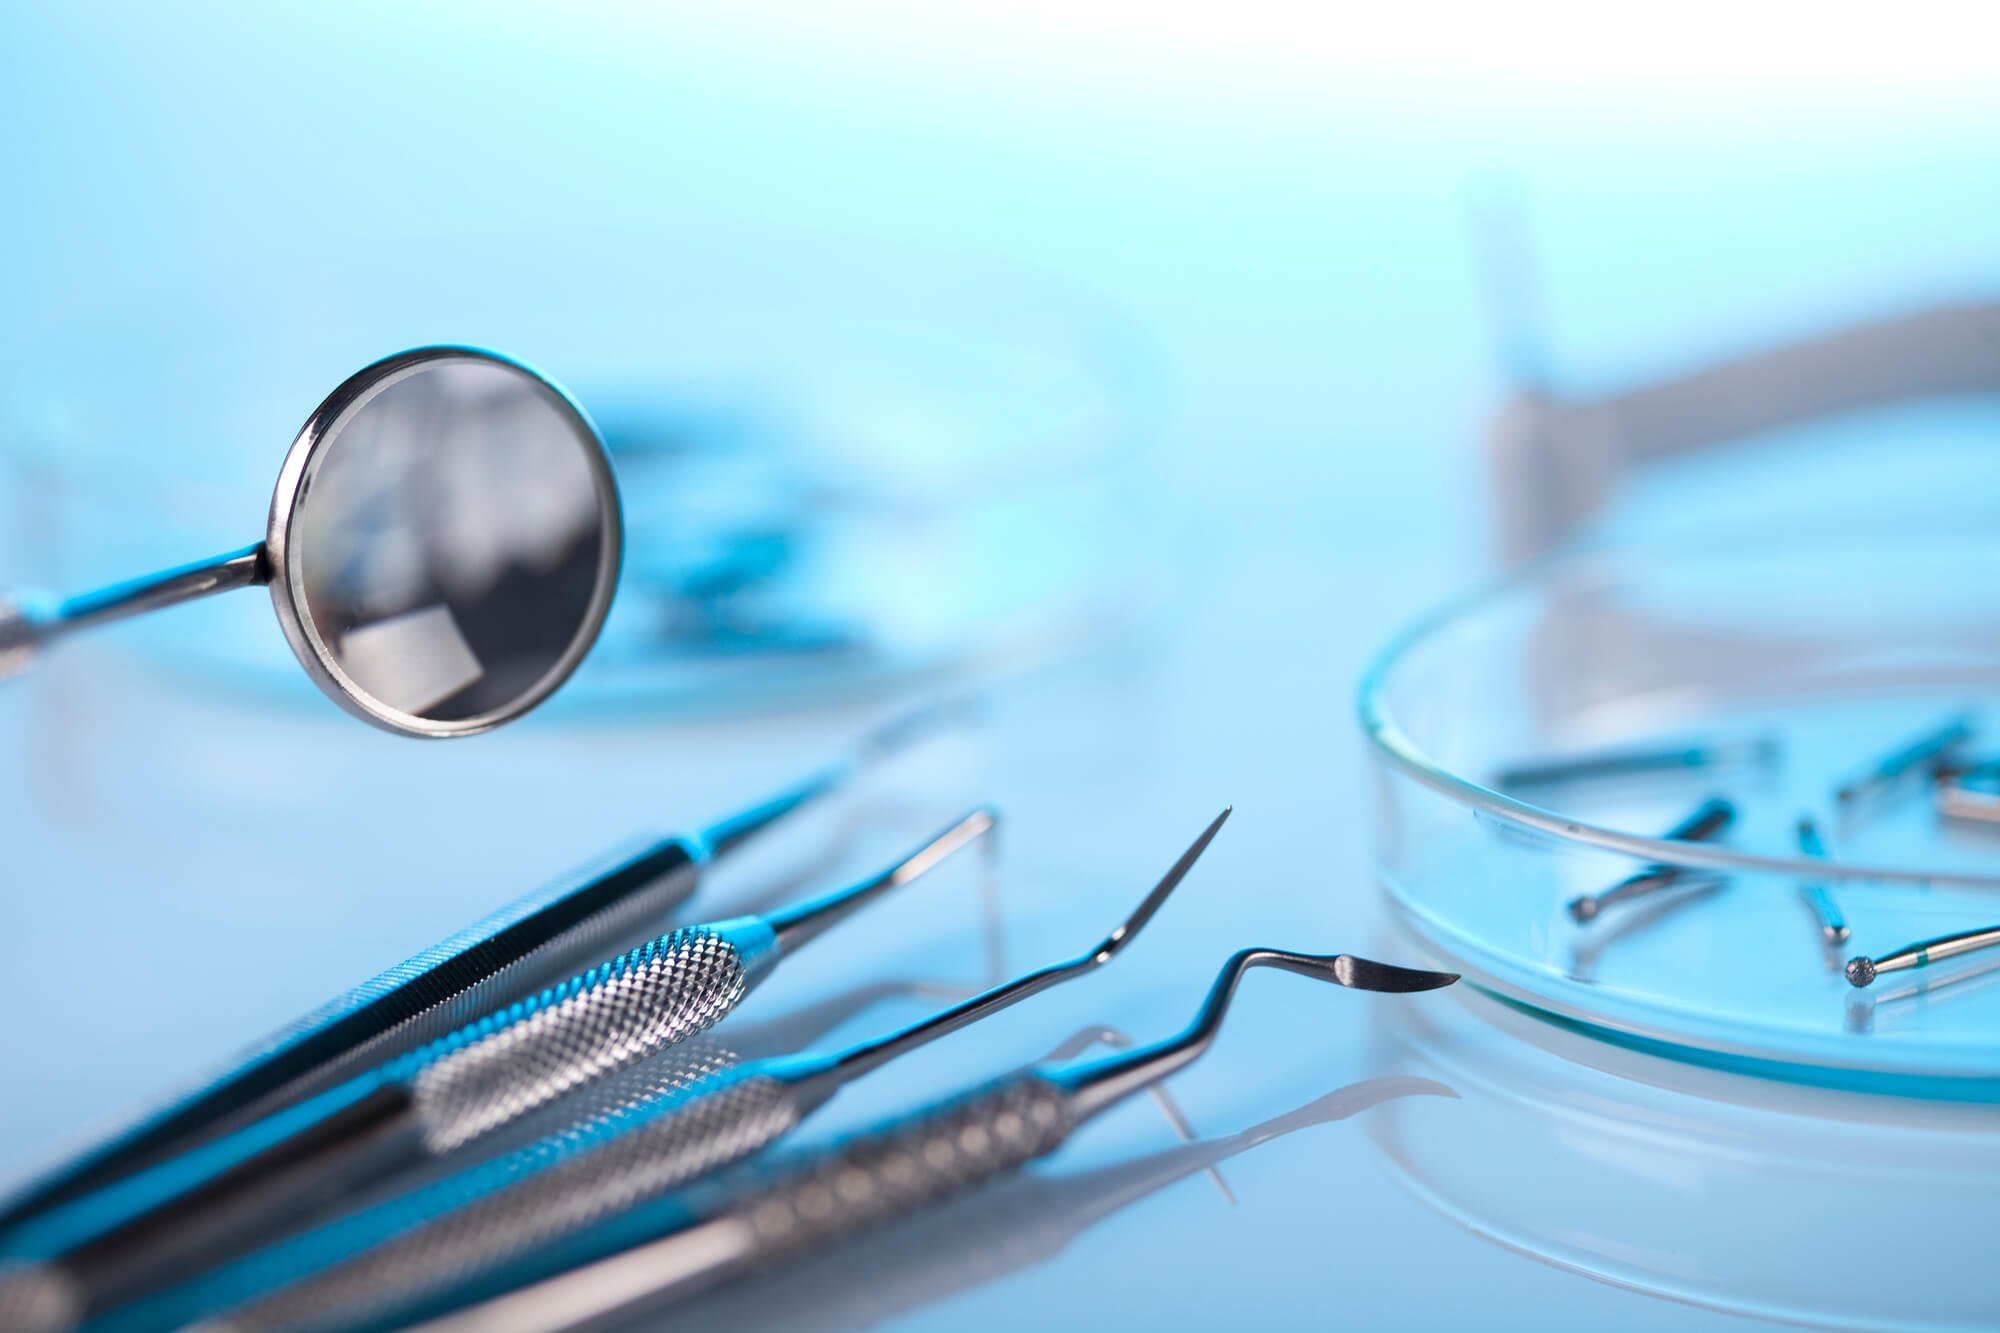 who offers the best tooth extractions greenville sc?